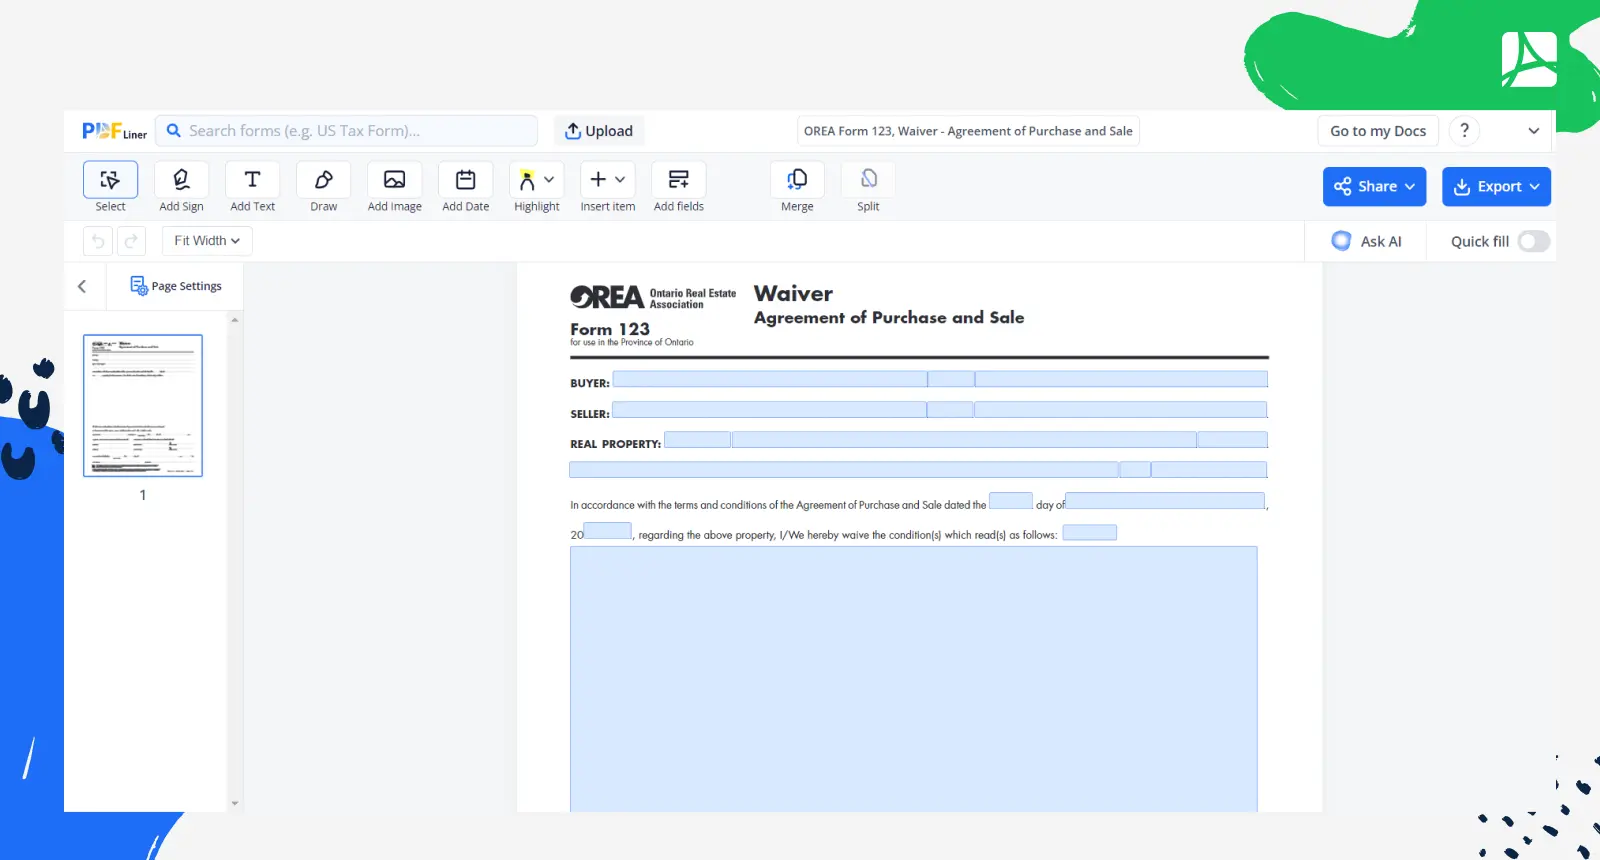 OREA Form 123 Waiver Agreement of Purchase and Sale Screenshot